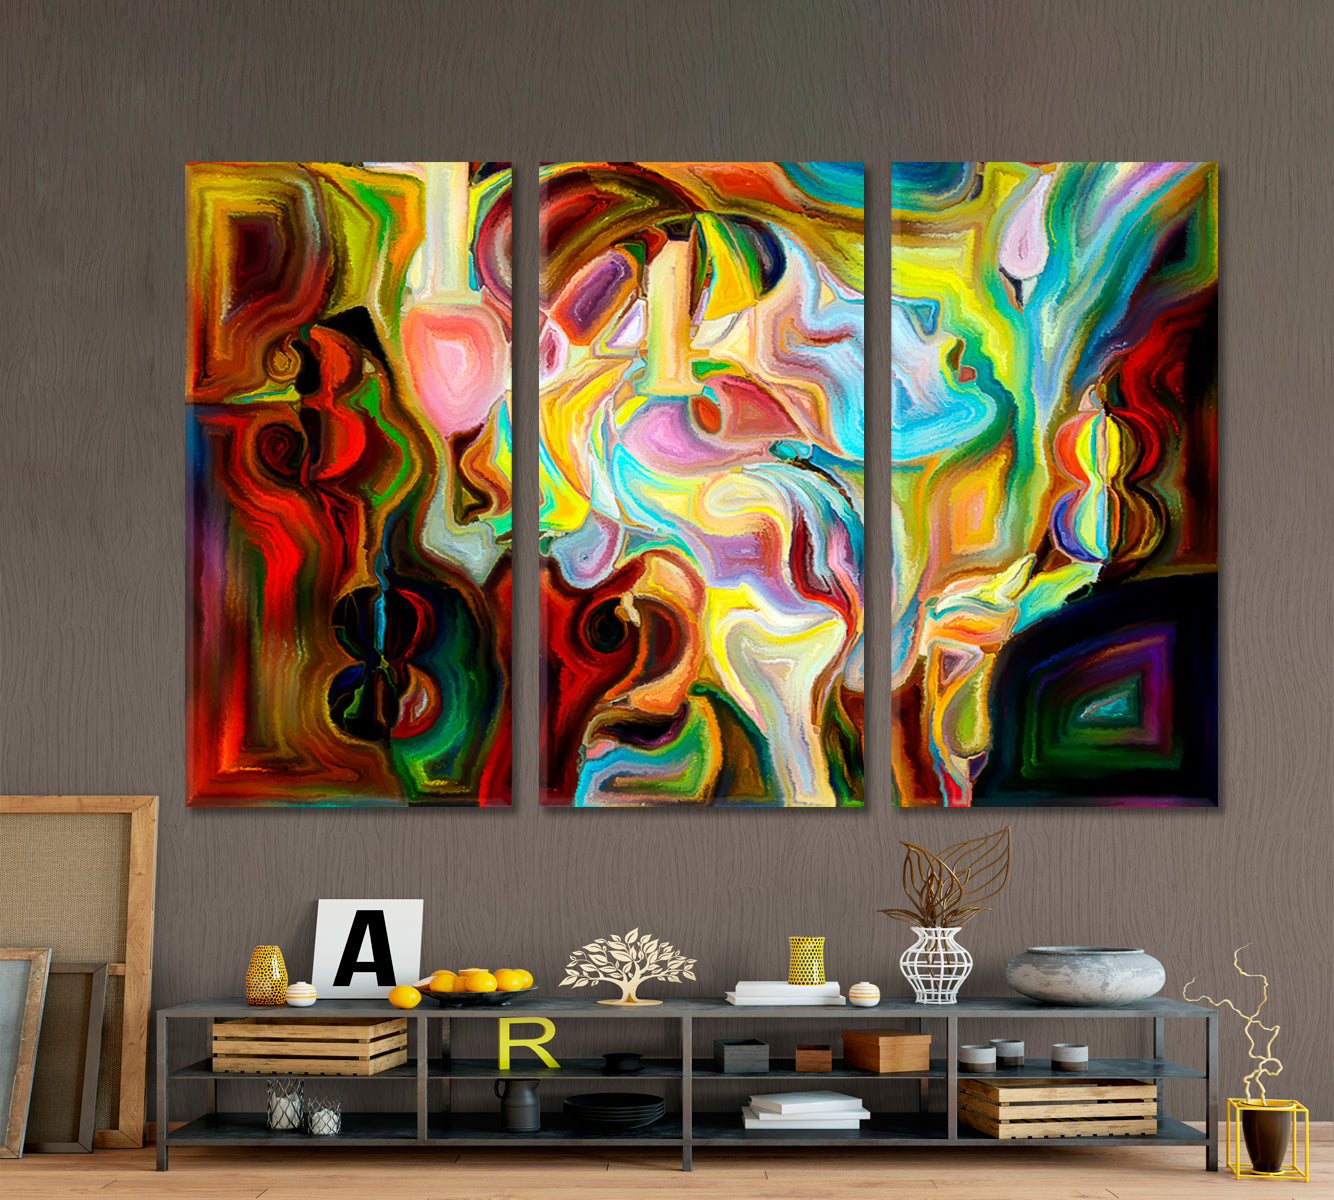 MULTIFACETED CONSCIOUSNESS Human and Numbers Abstract Art Print Artesty 3 panels 36" x 24" 